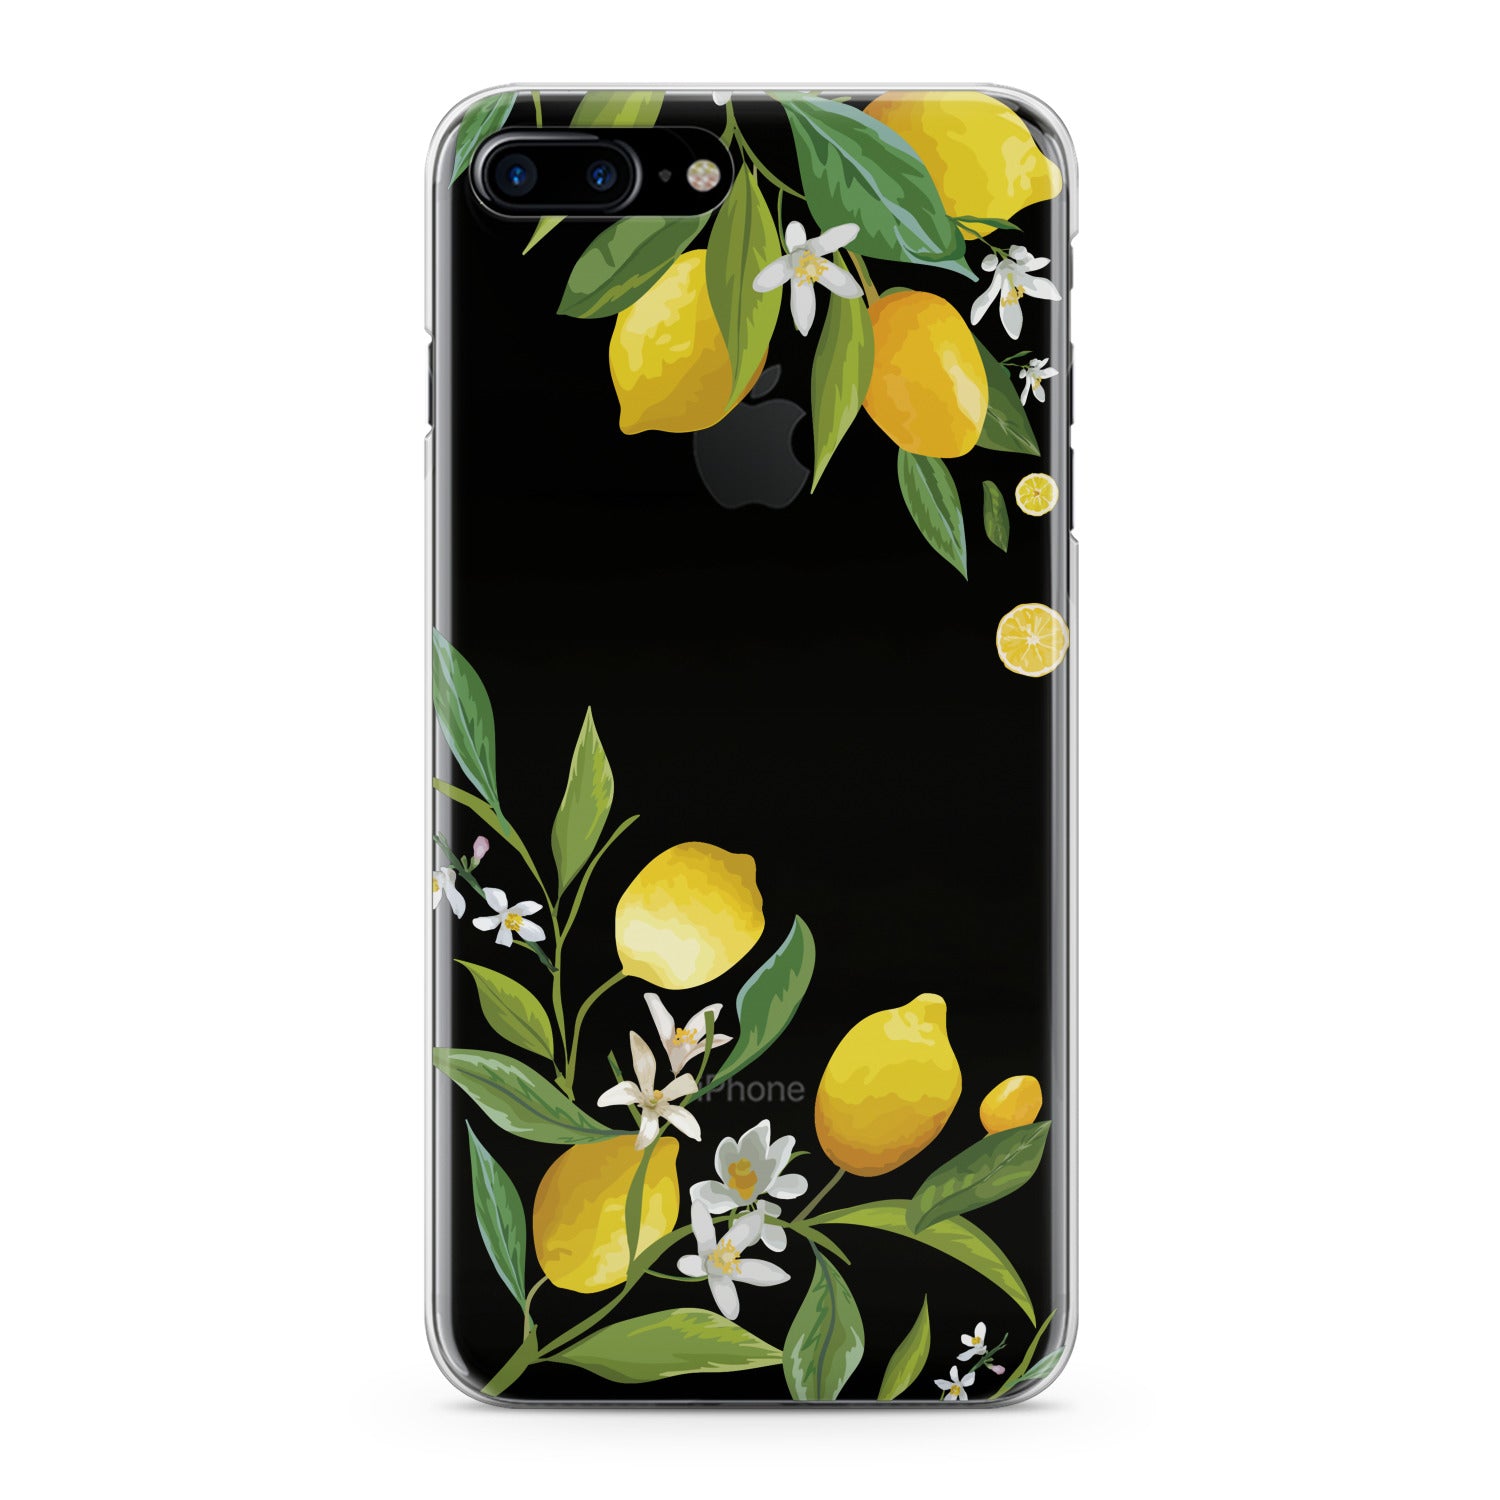 Lex Altern Juicy Lemons Phone Case for your iPhone & Android phone.